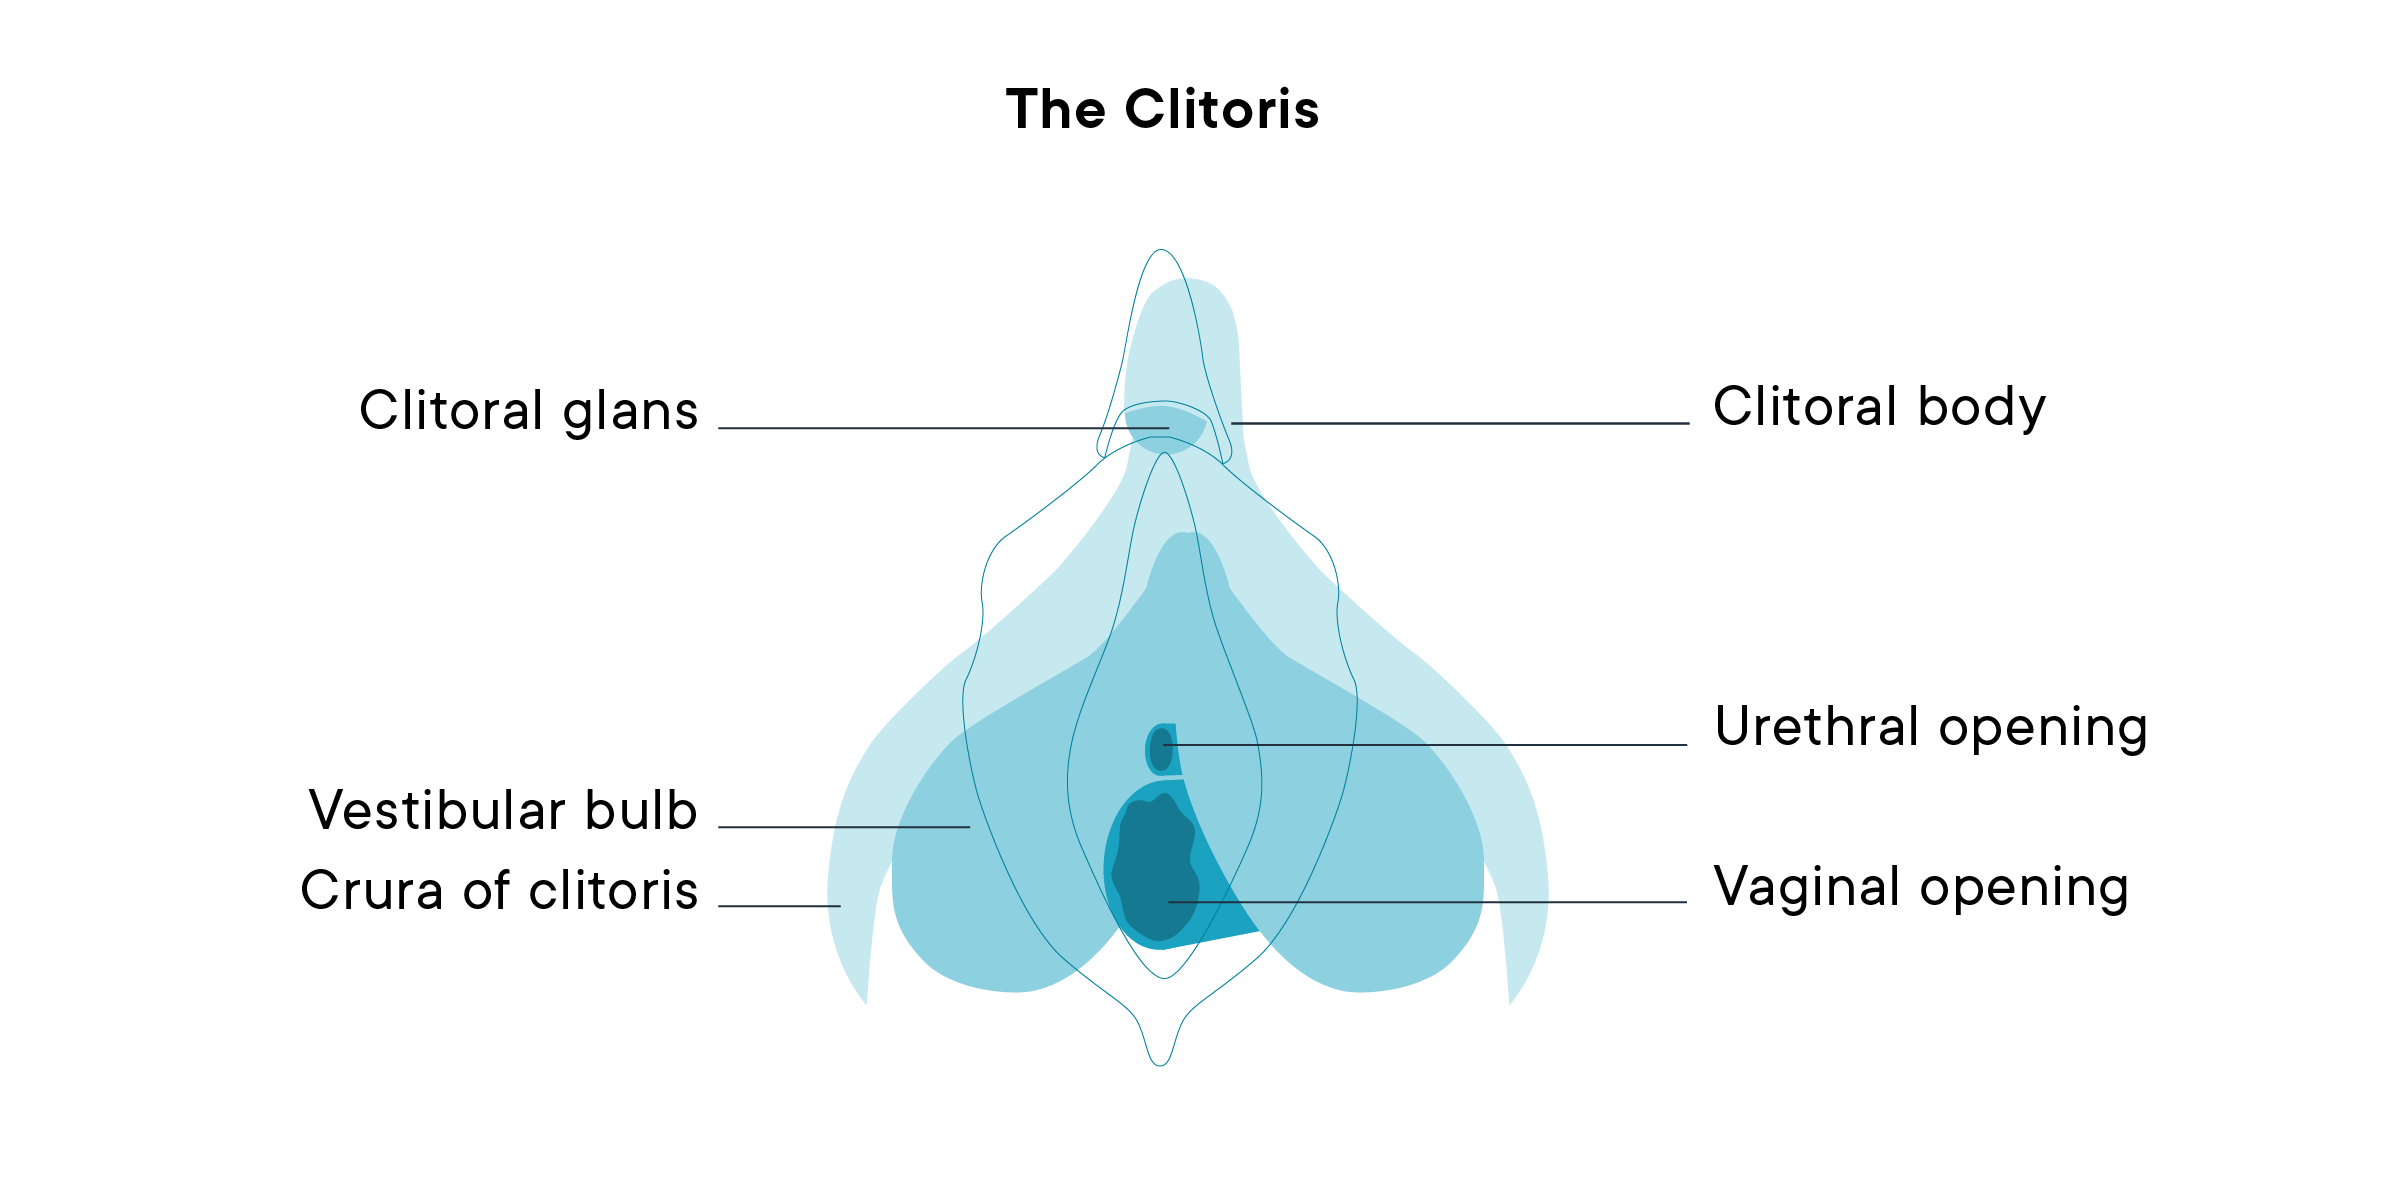 Where is the clitoris? 